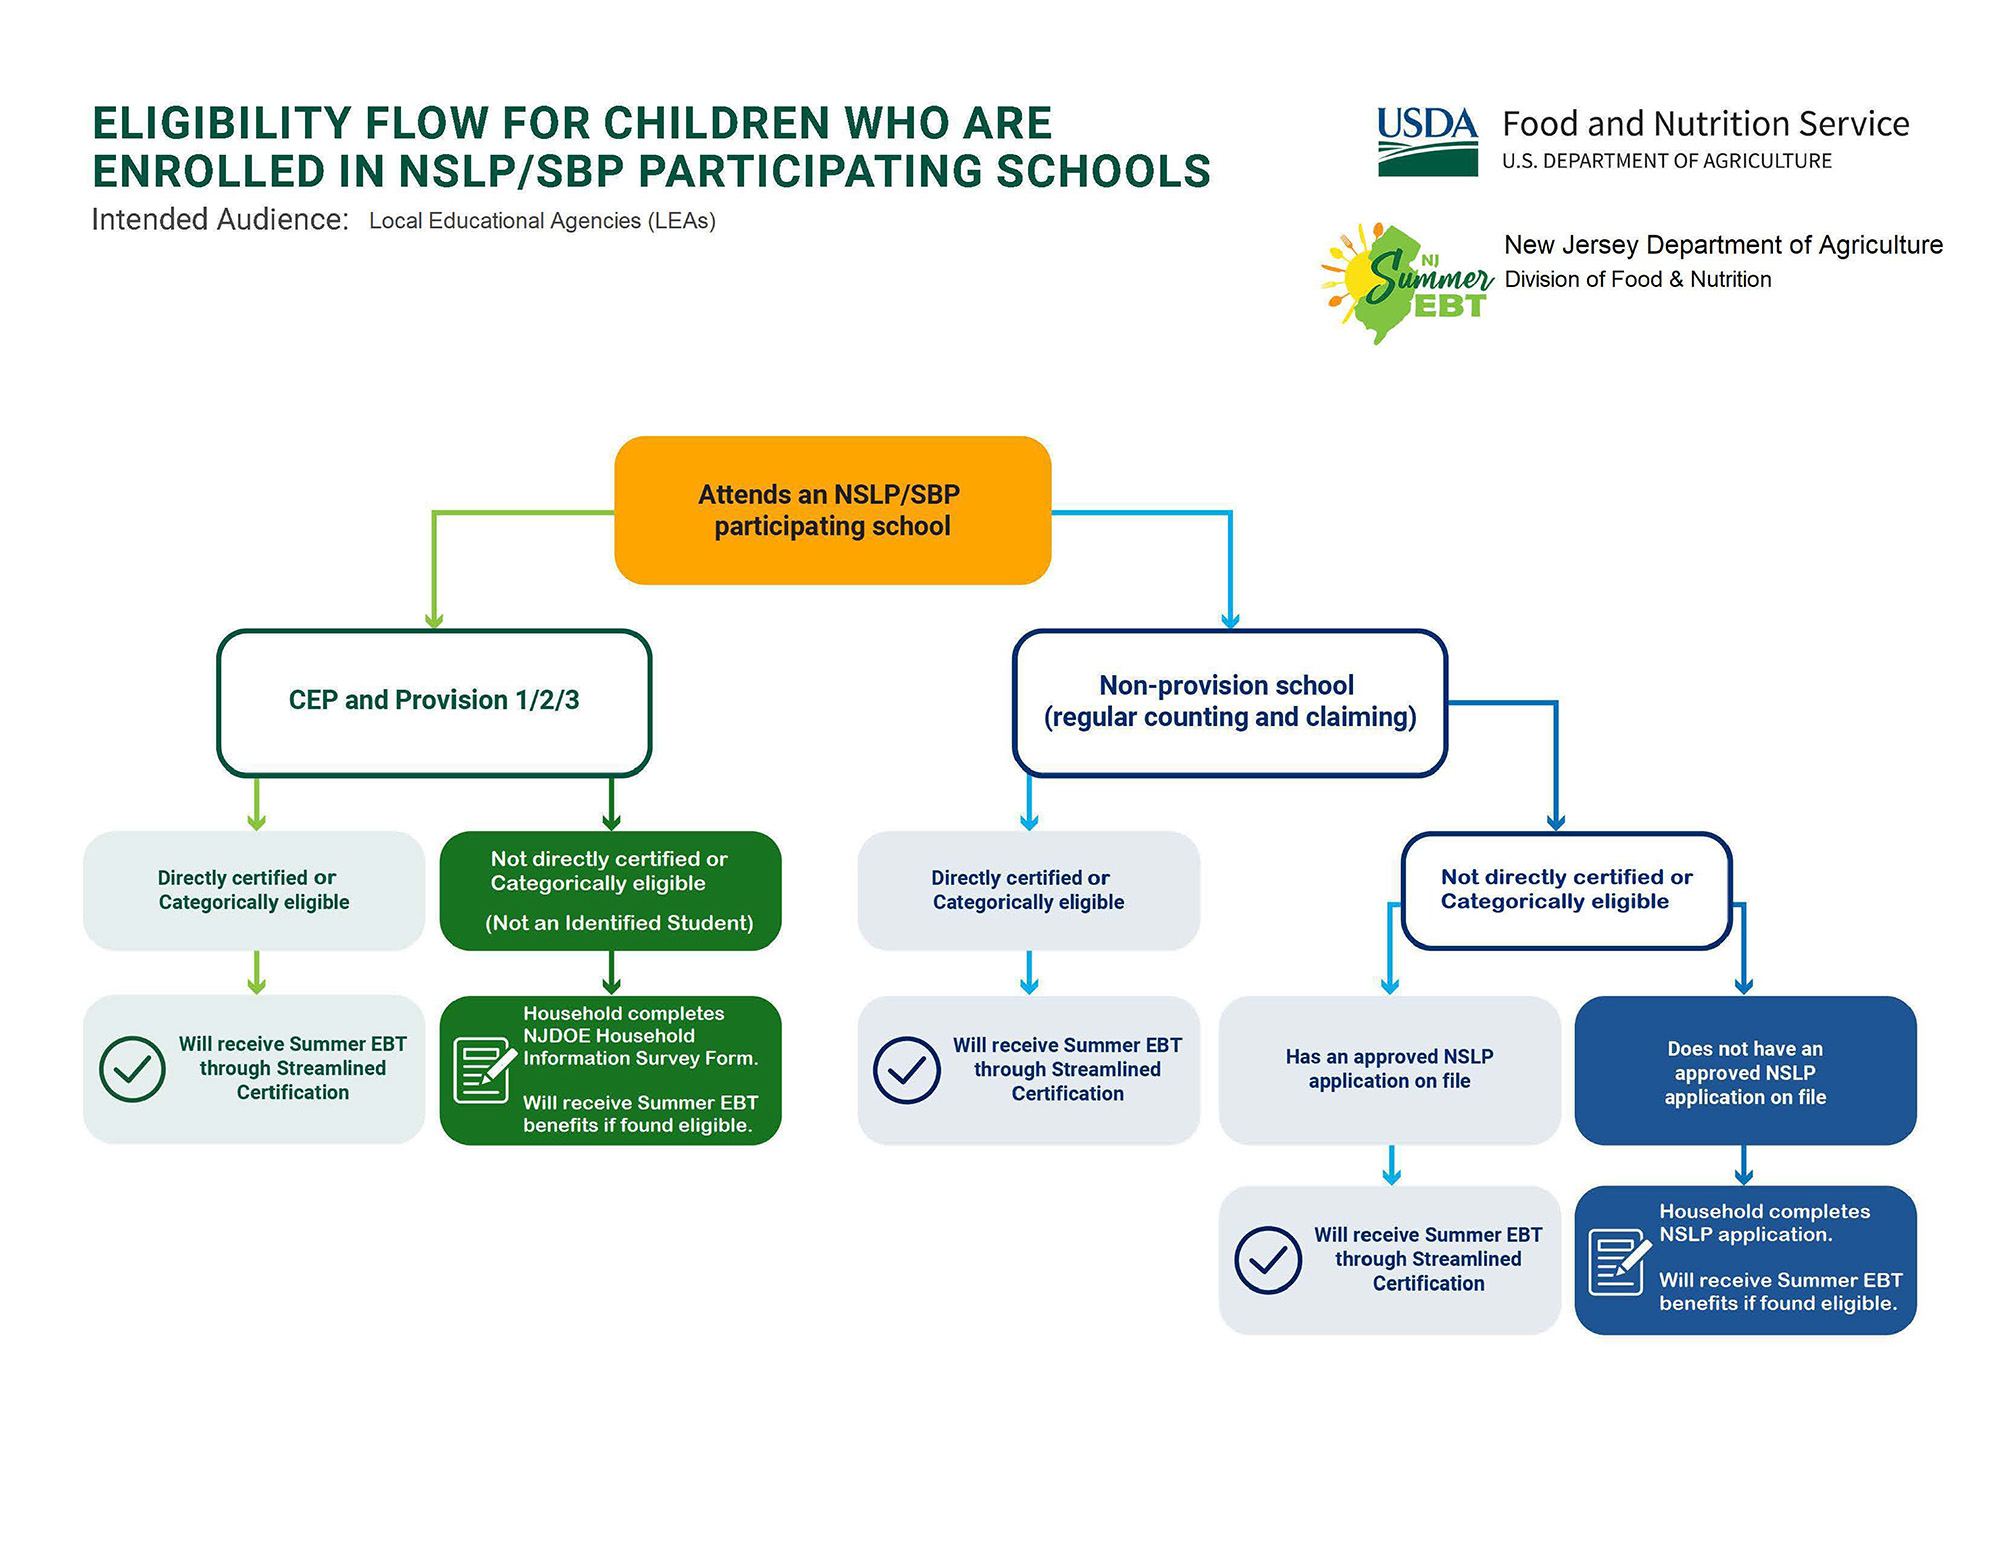 ELIGIBILITY FLOW FOR CHILDREN WHO ARE ENROLLED IN NSLP/SBP PARTICIPATING SCHOOLS